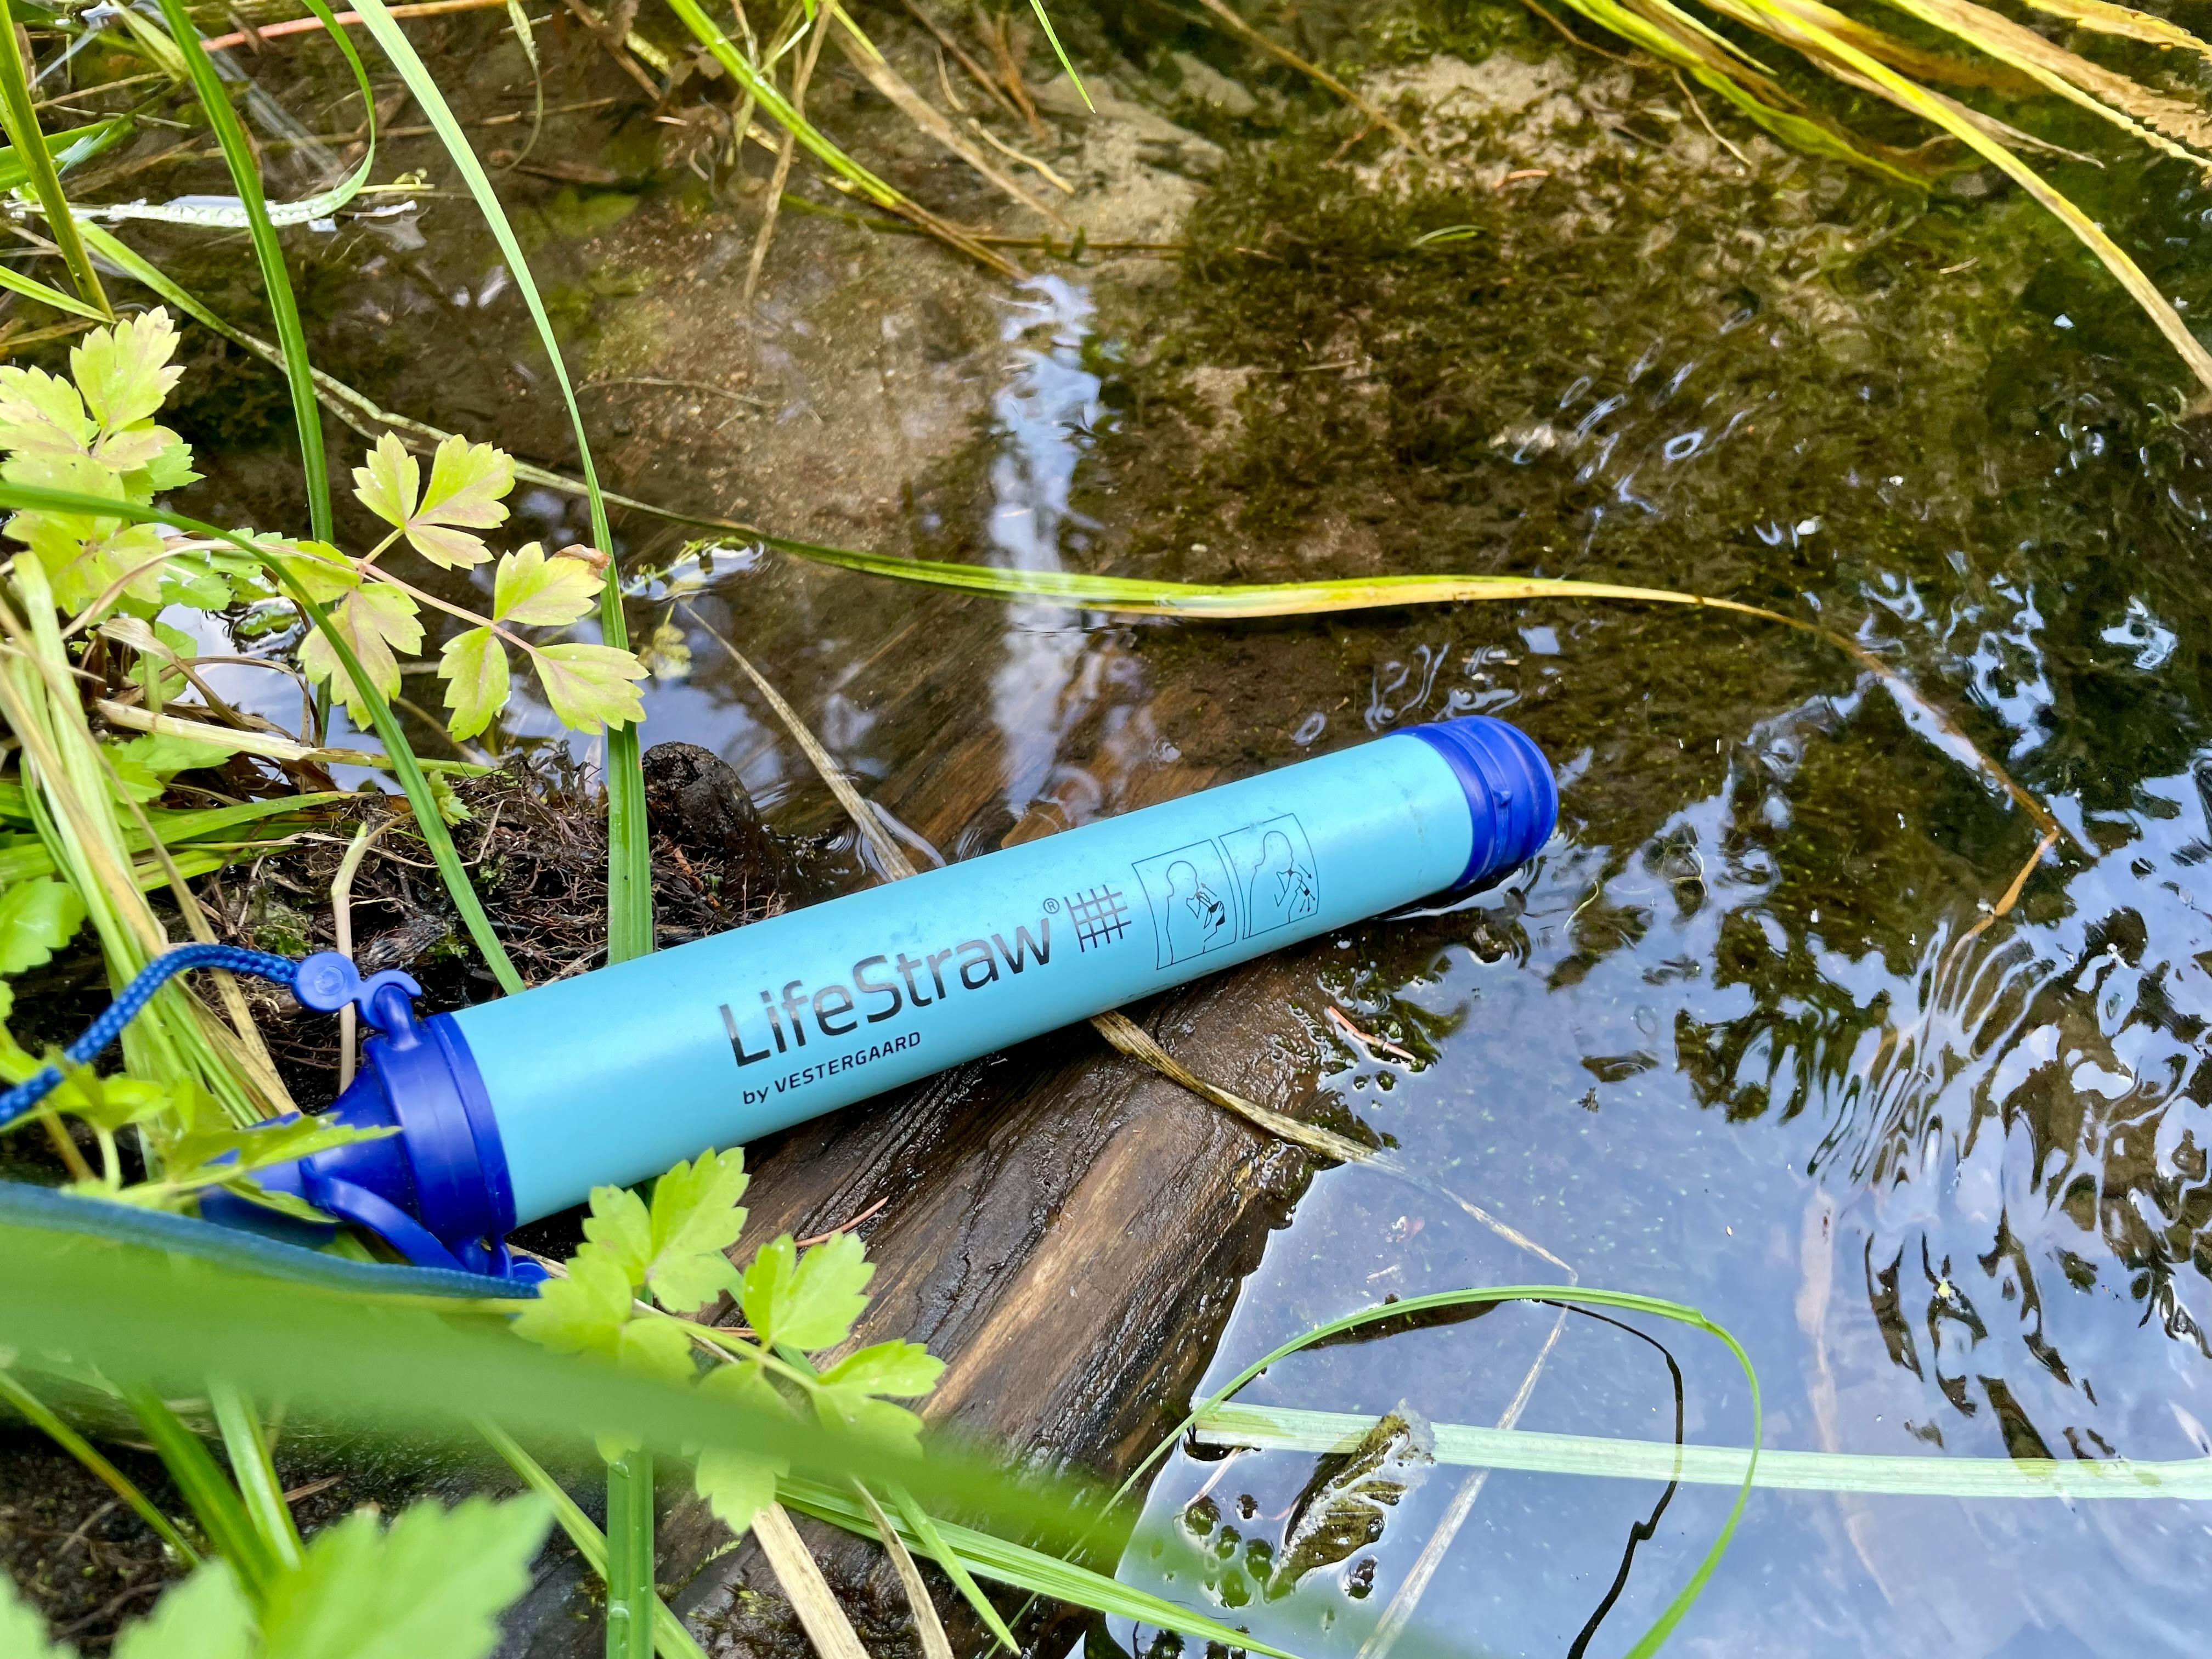 The author's LifeStraw is arranged half in and half out of the water to show how it works.